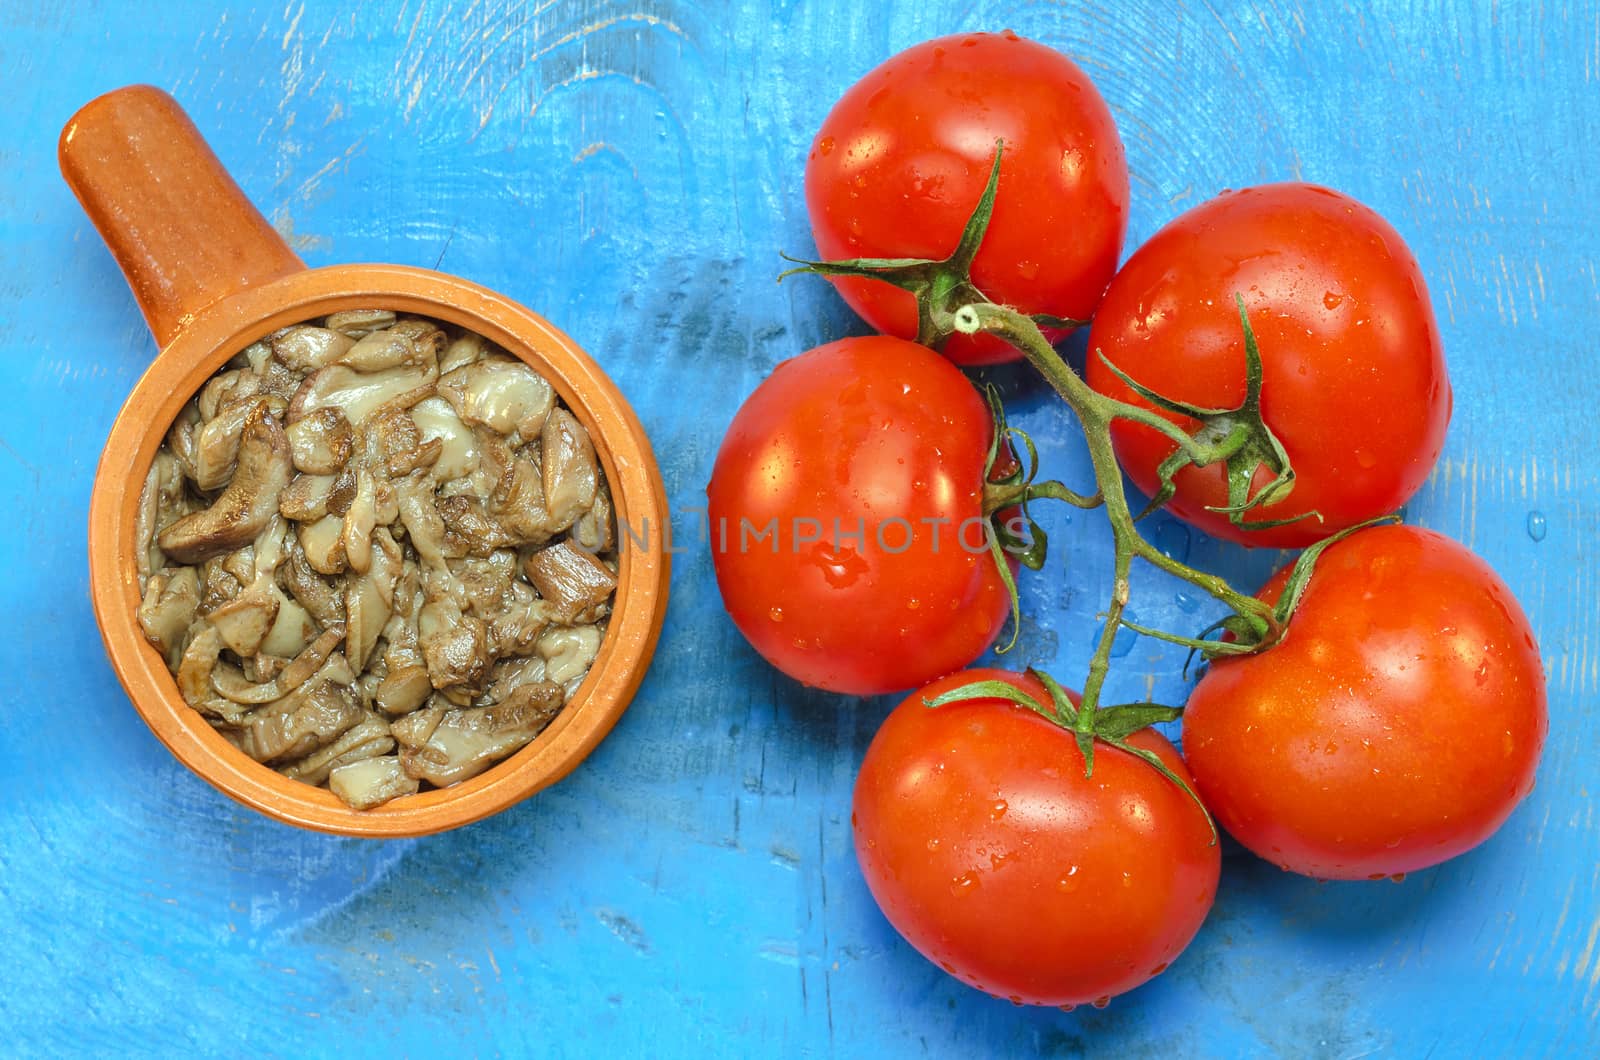 Fried mushrooms and fresh tomatoes on the branch by Gaina